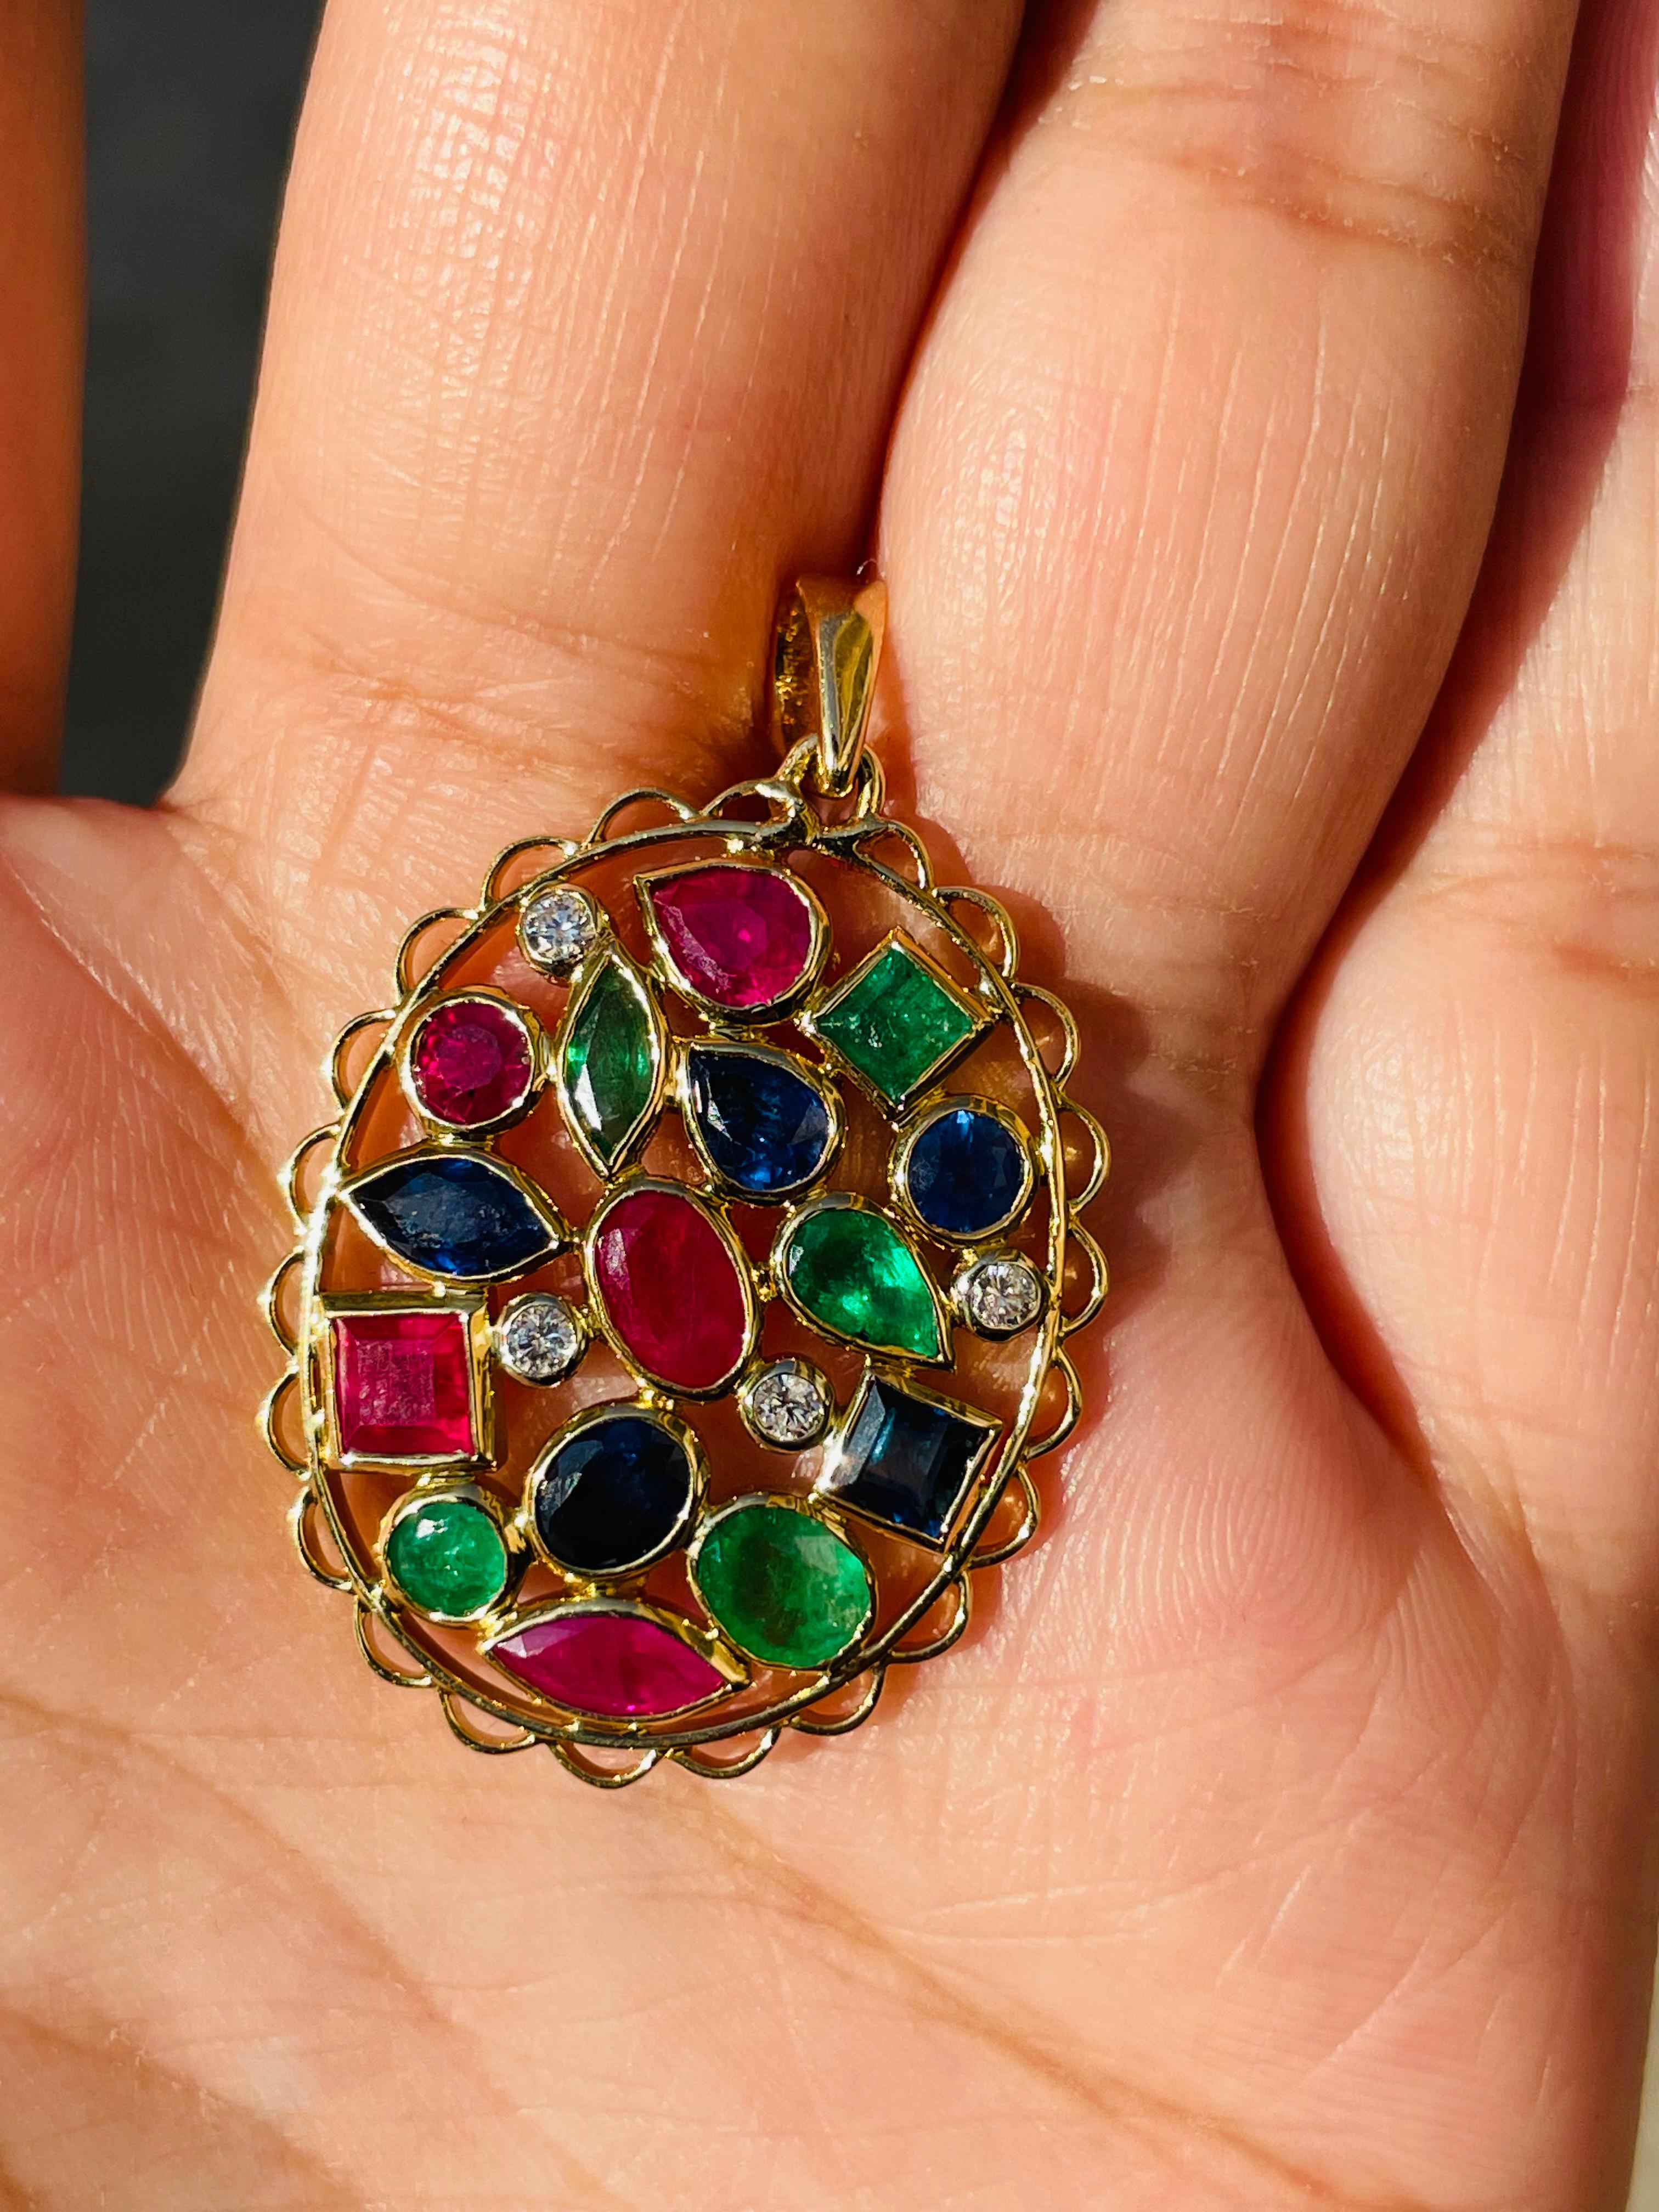 Emerald, ruby and blue sapphire pendant in 18K Gold. It has a mix cut gemstones studded with diamonds that completes your look with a decent touch. Pendants are used to wear or gifted to represent love and promises. It's an attractive jewelry piece